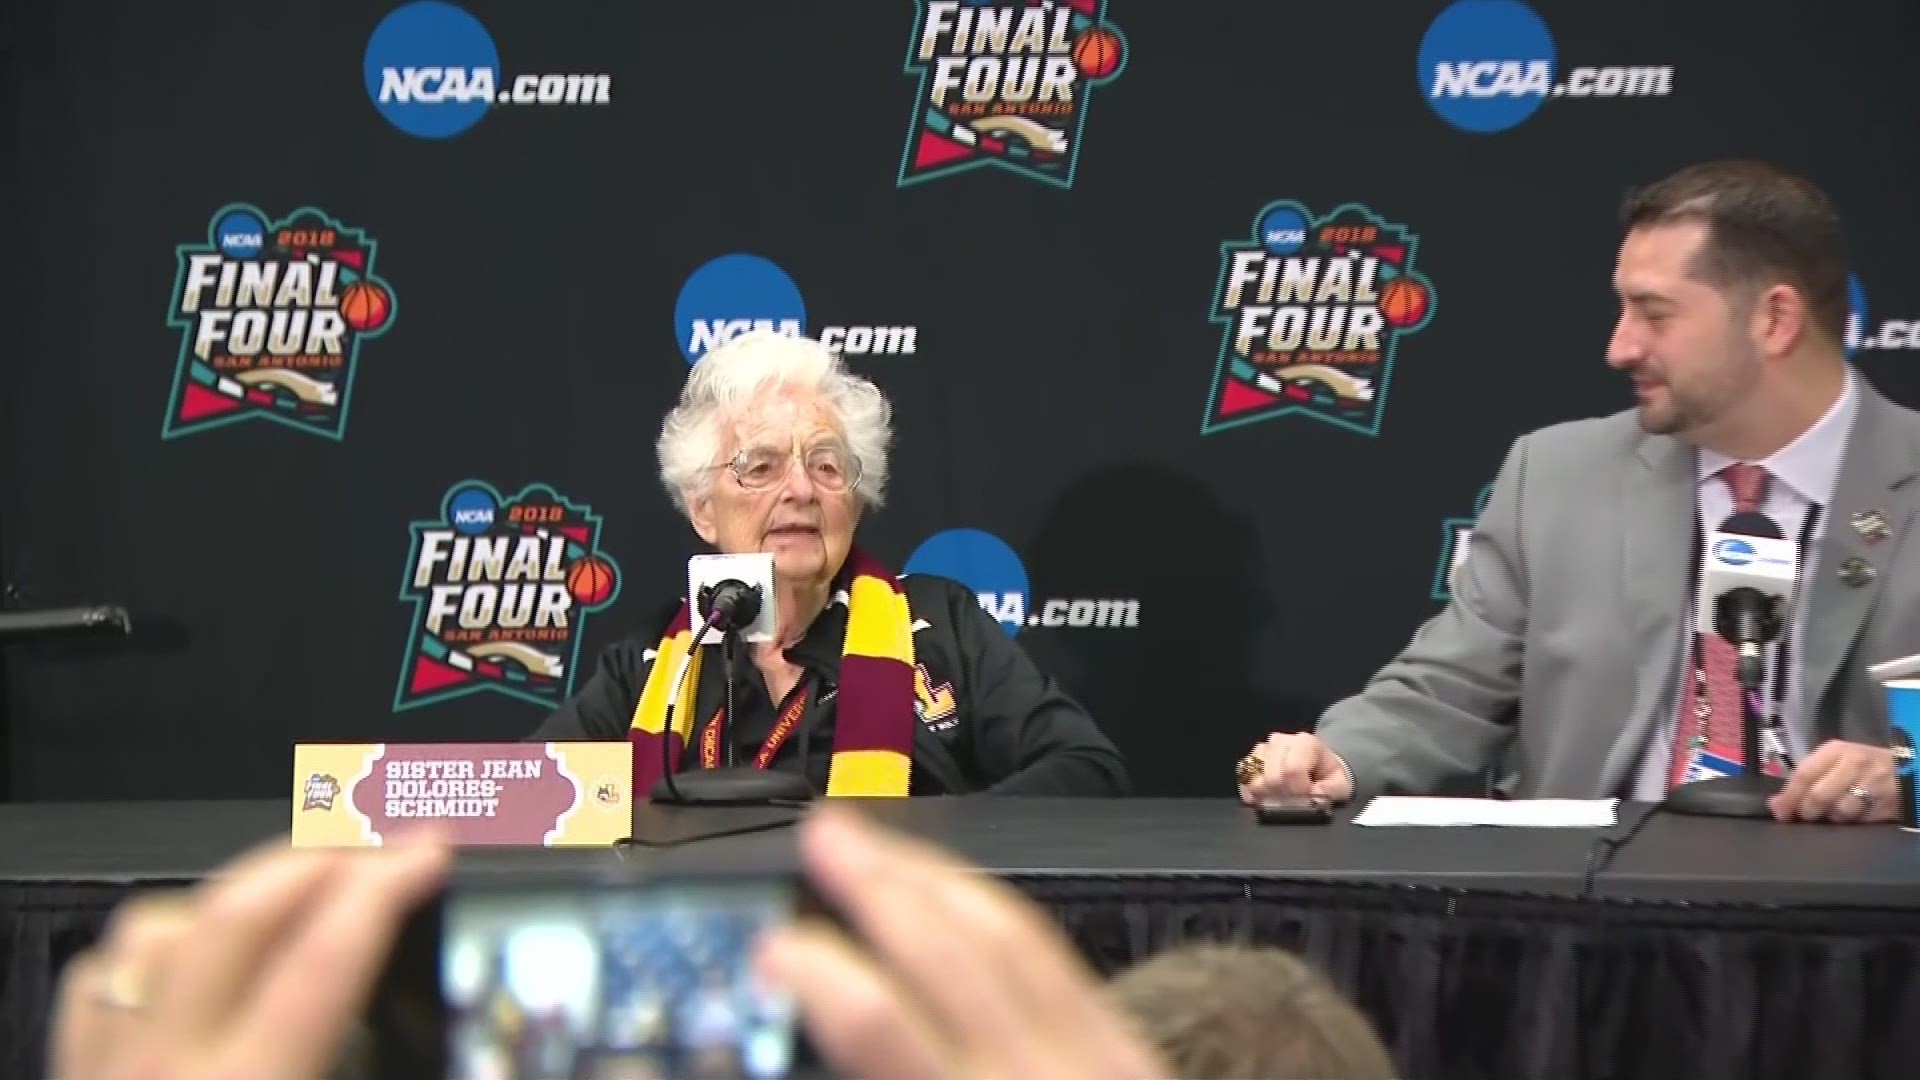 Sister Jean Dolores Schmidt, chaplain for the Loyola Ramblers men's basketball team, speaks with media at the Alamodome.